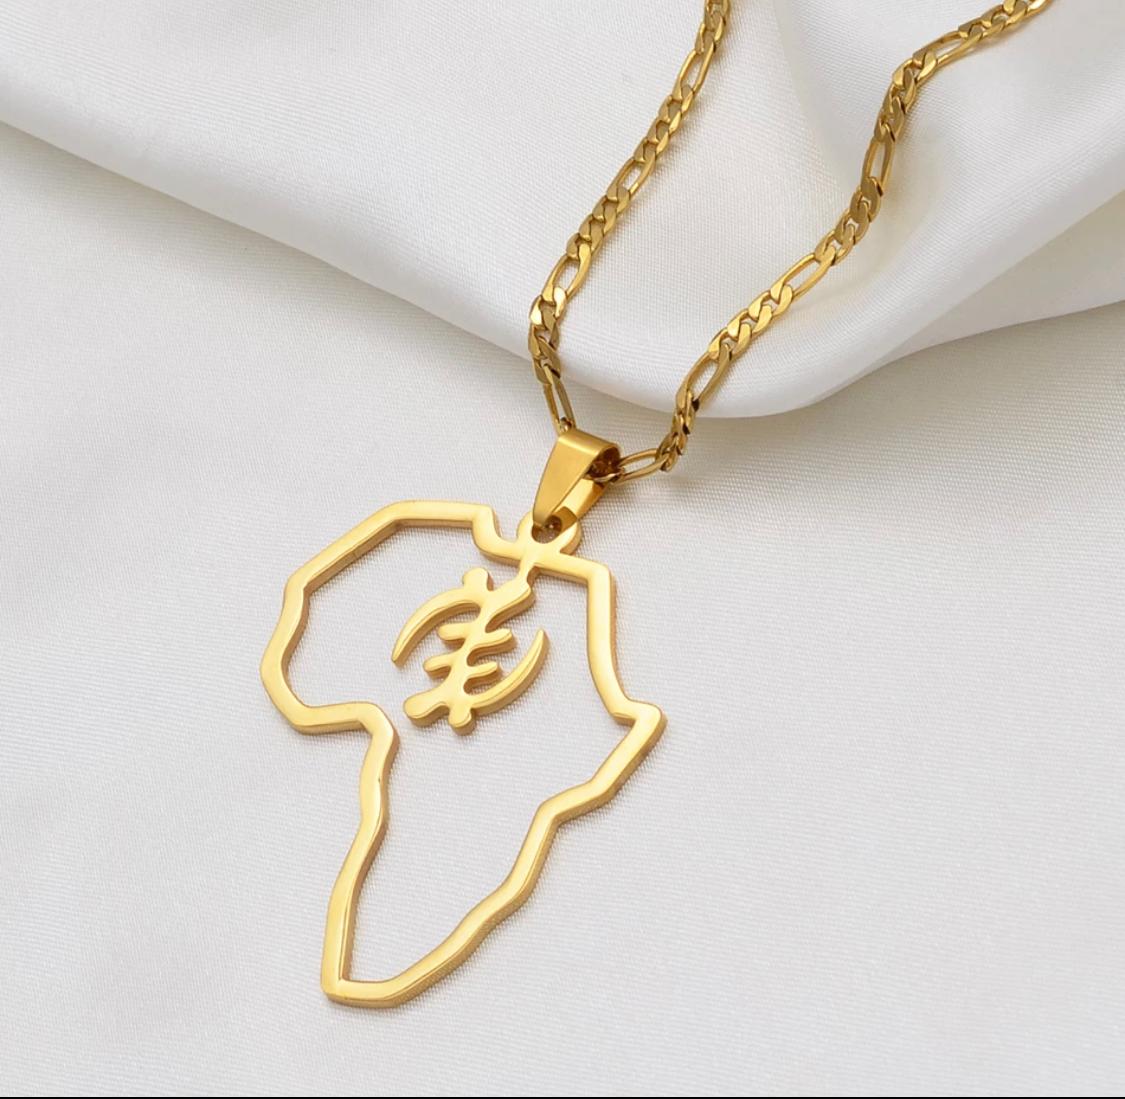 Gye Nyame African Symbol Pendant Necklaces For Men and women.